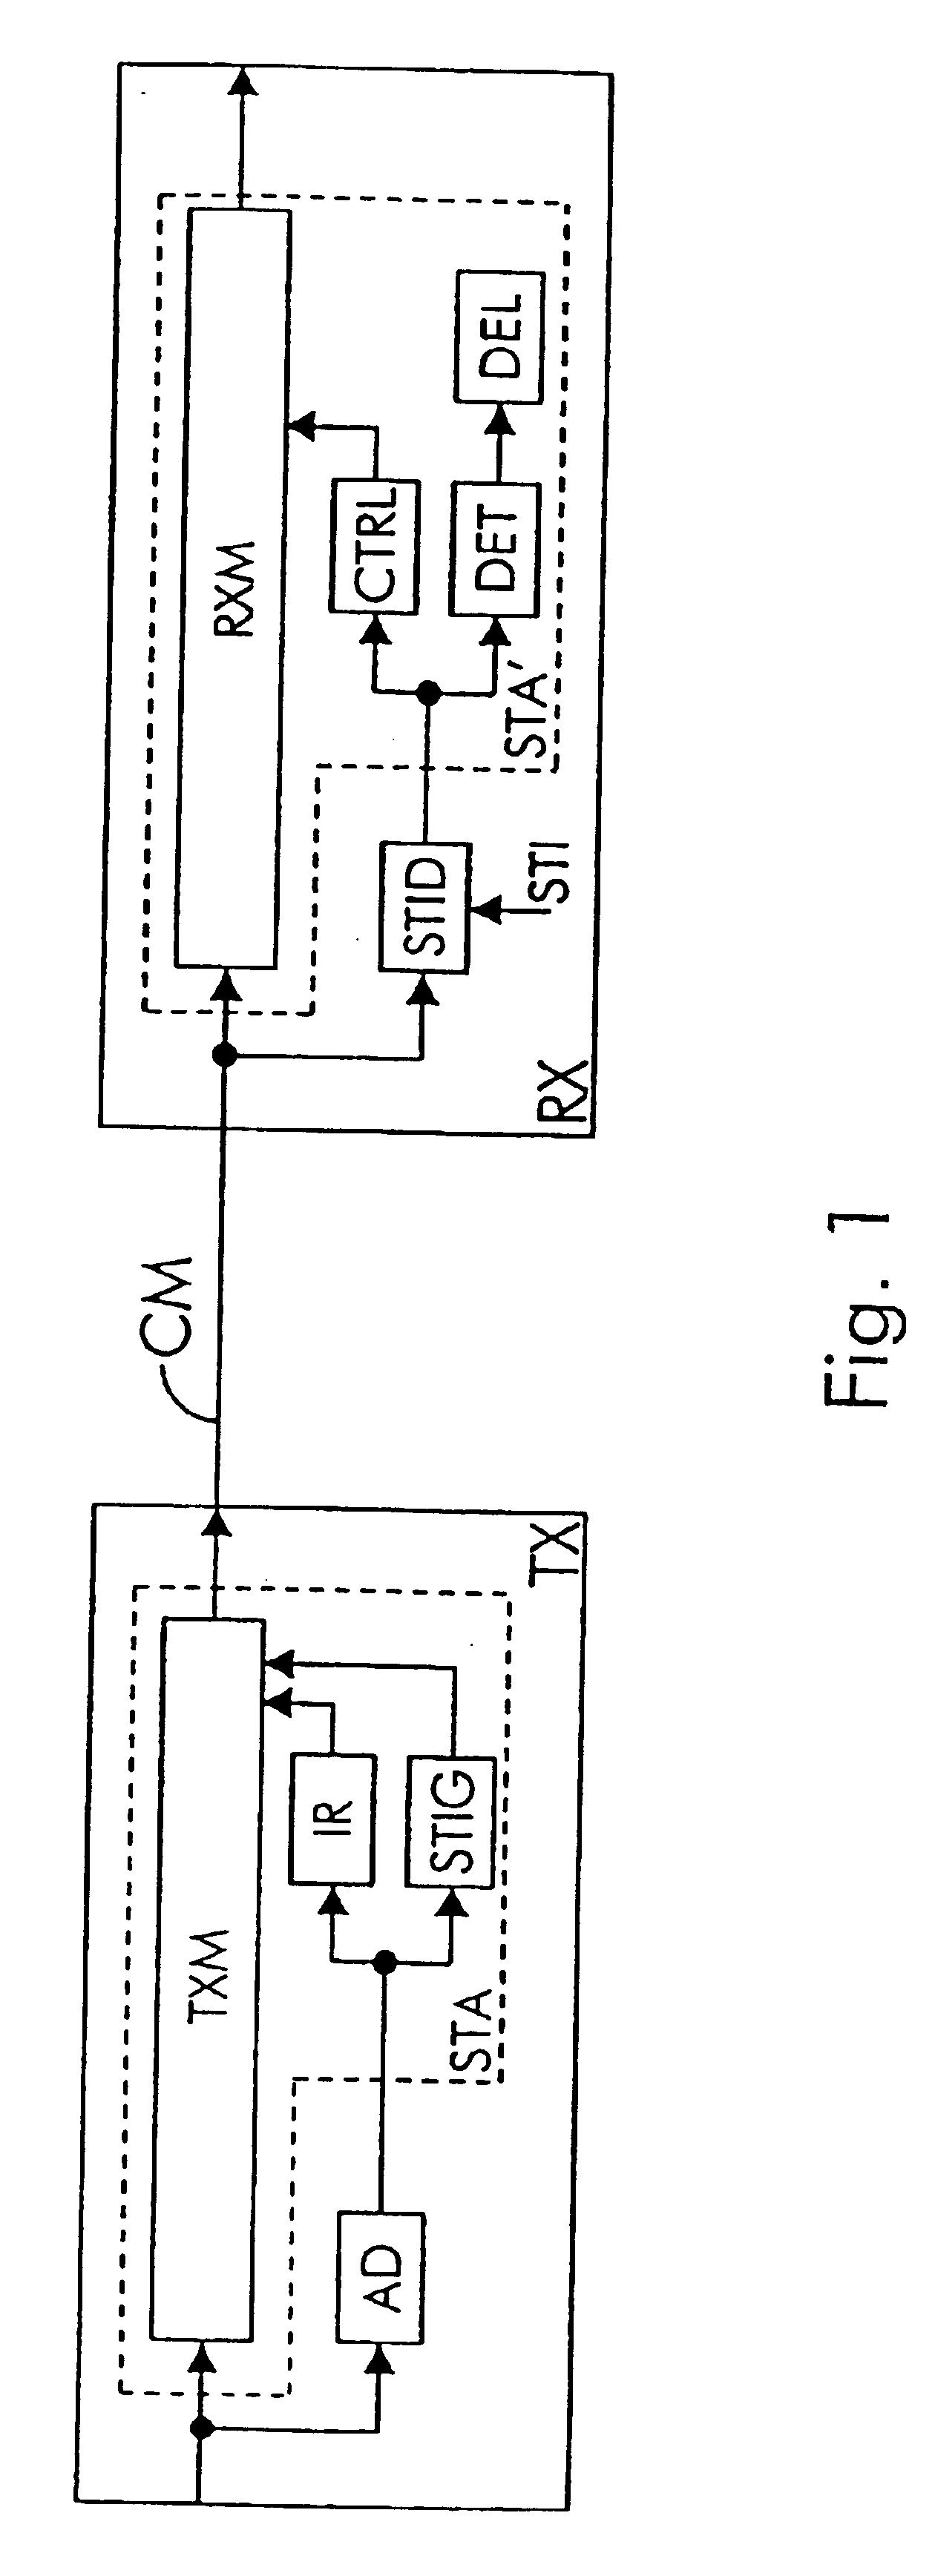 Method and arrangements for fast transition from a low power state to a full power state in a communication system